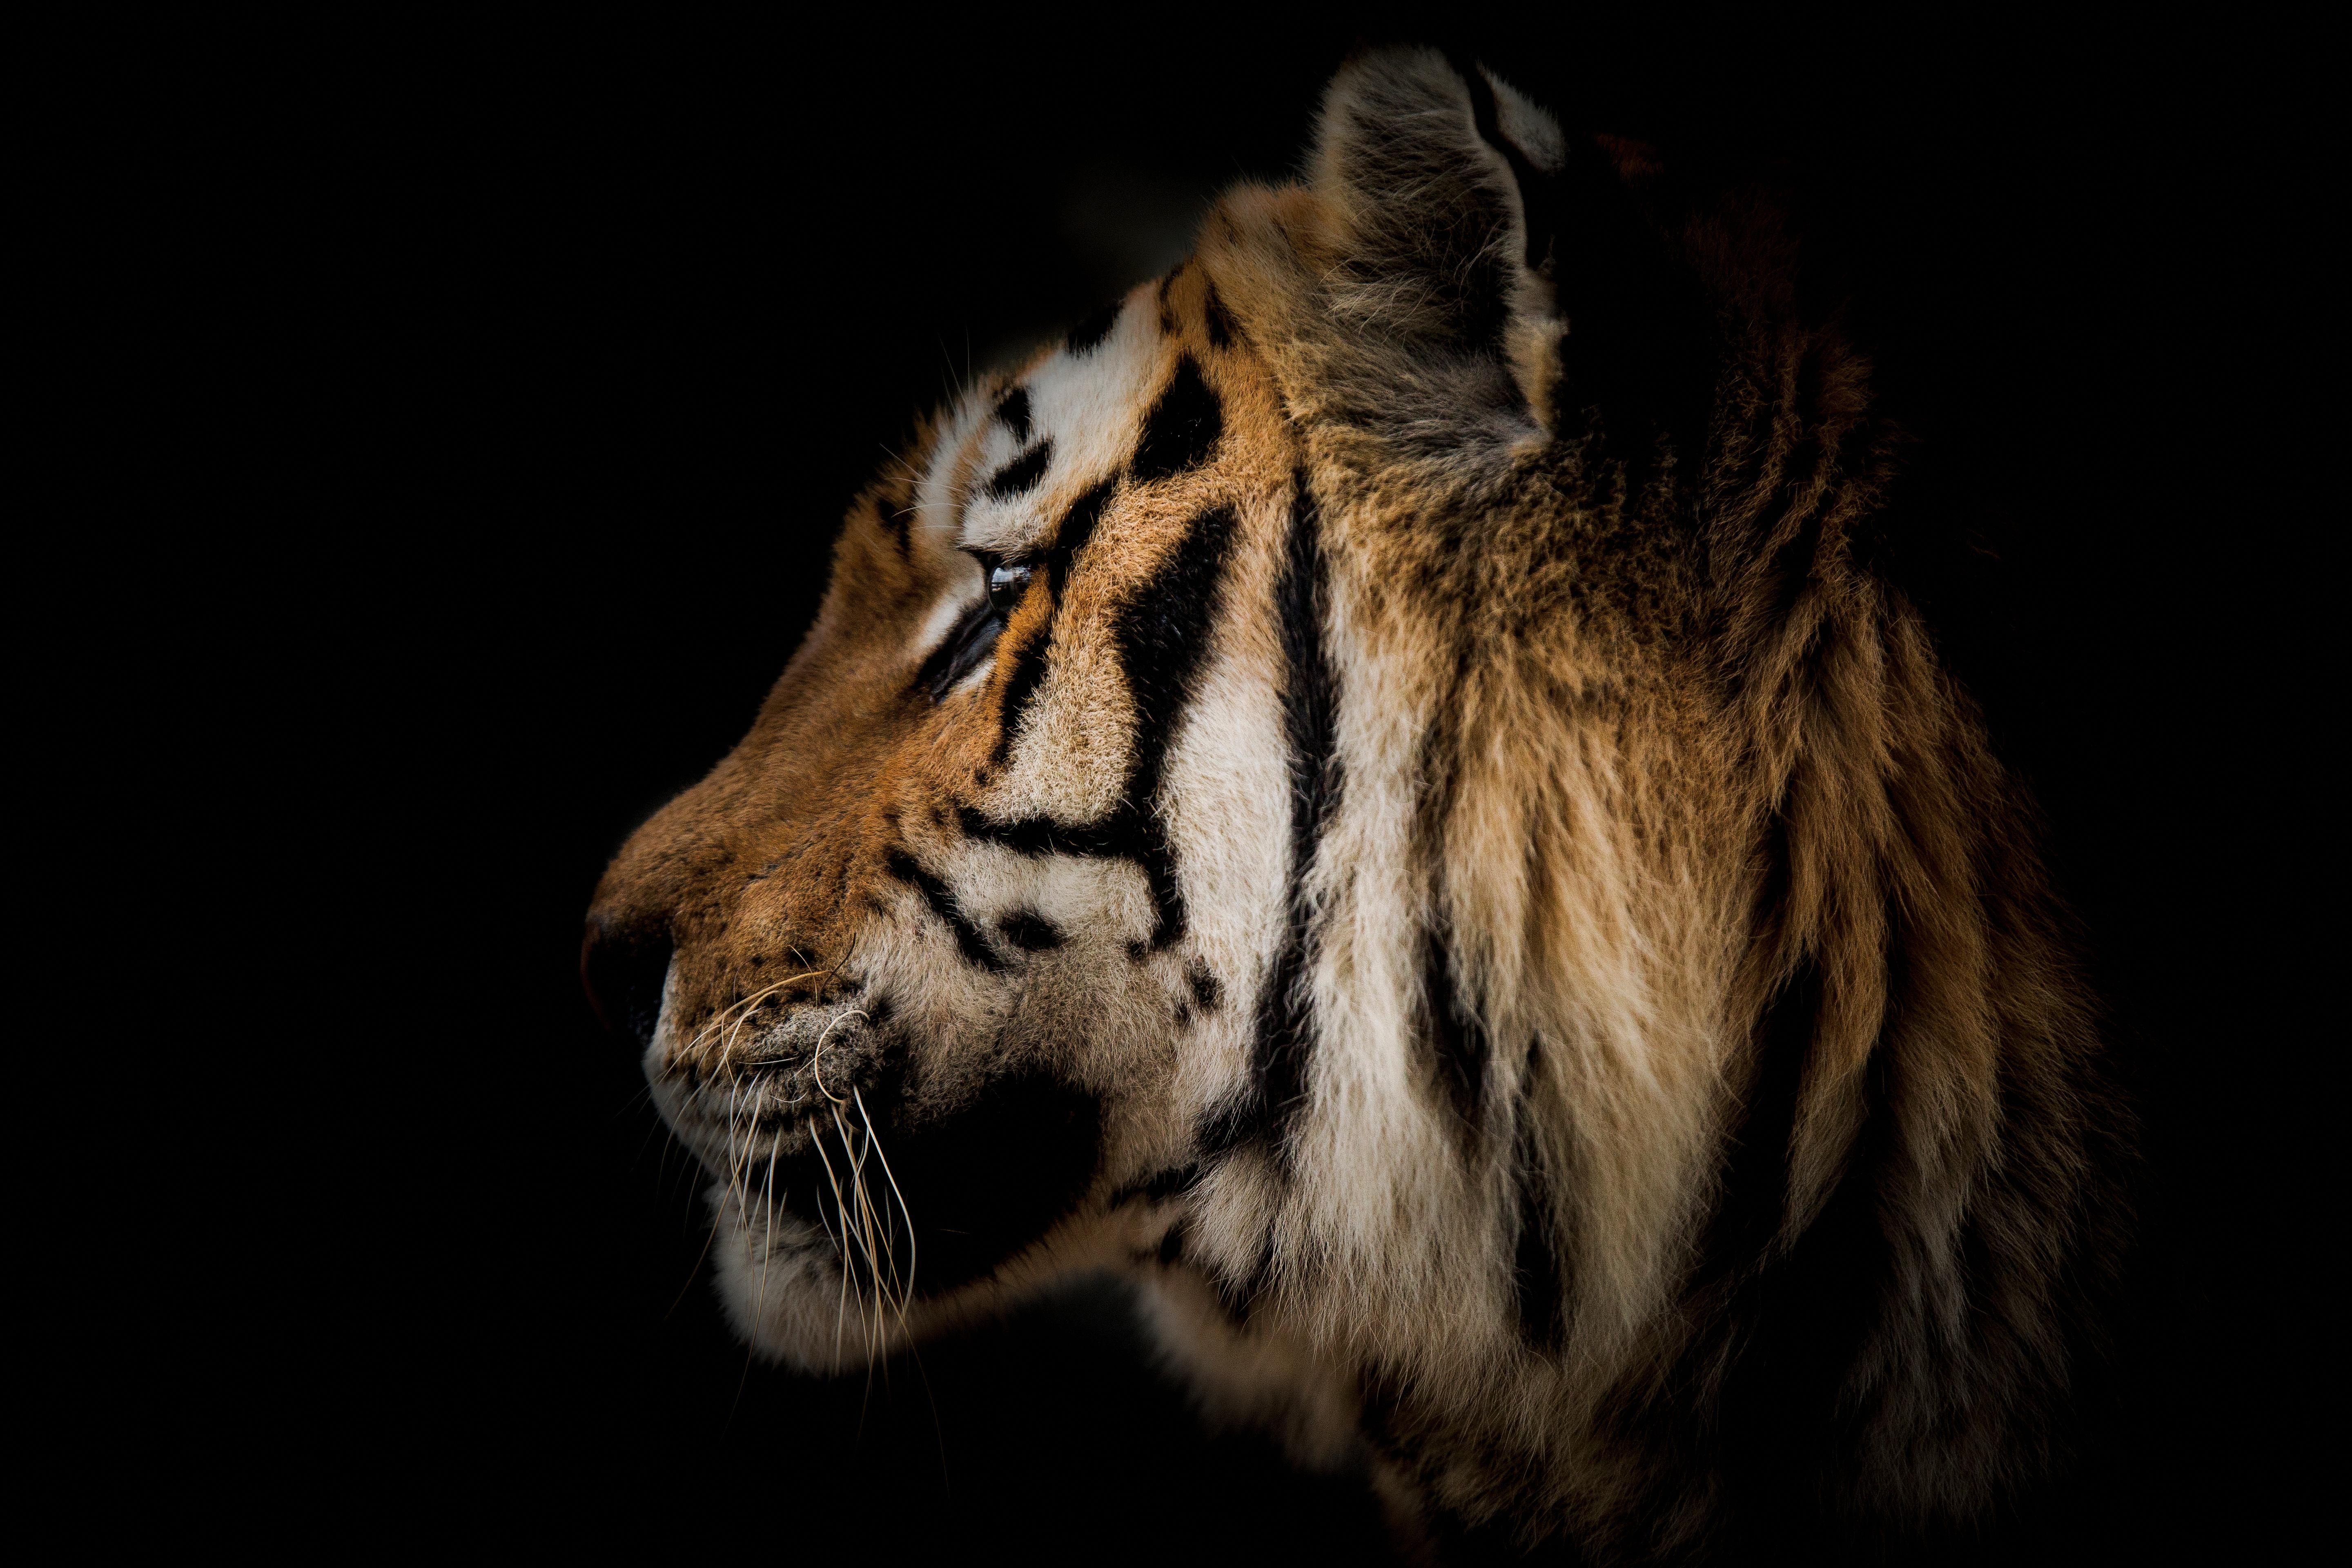 Shane Russeck Black and White Photograph - Tiger Photograph "Tiger Portrait" - 60x40 Photography Wildlife Art Unsigned 